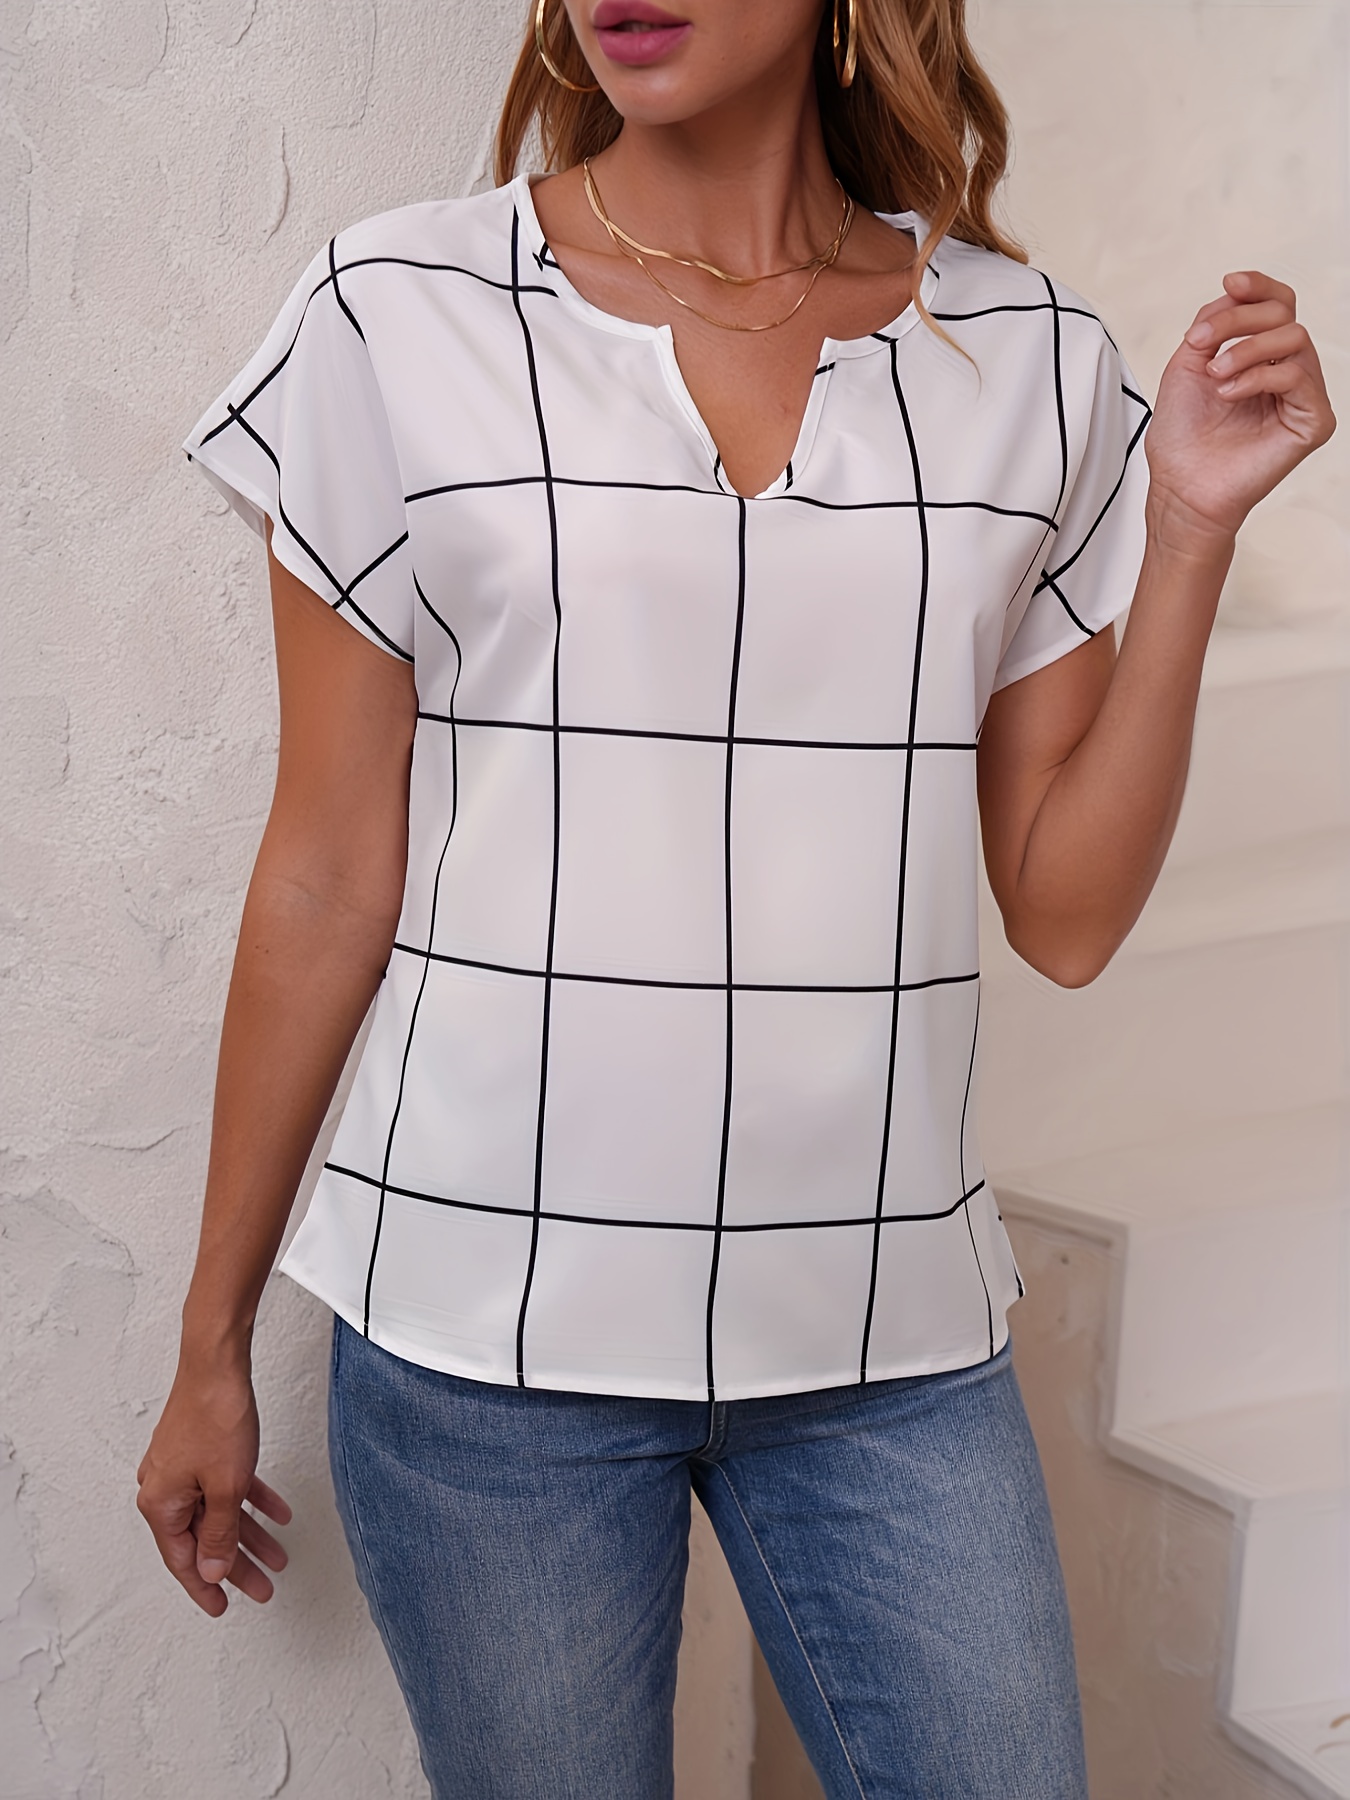 plaid print v neck blouse short sleeve casual blouse for spring summer womens clothing details 2